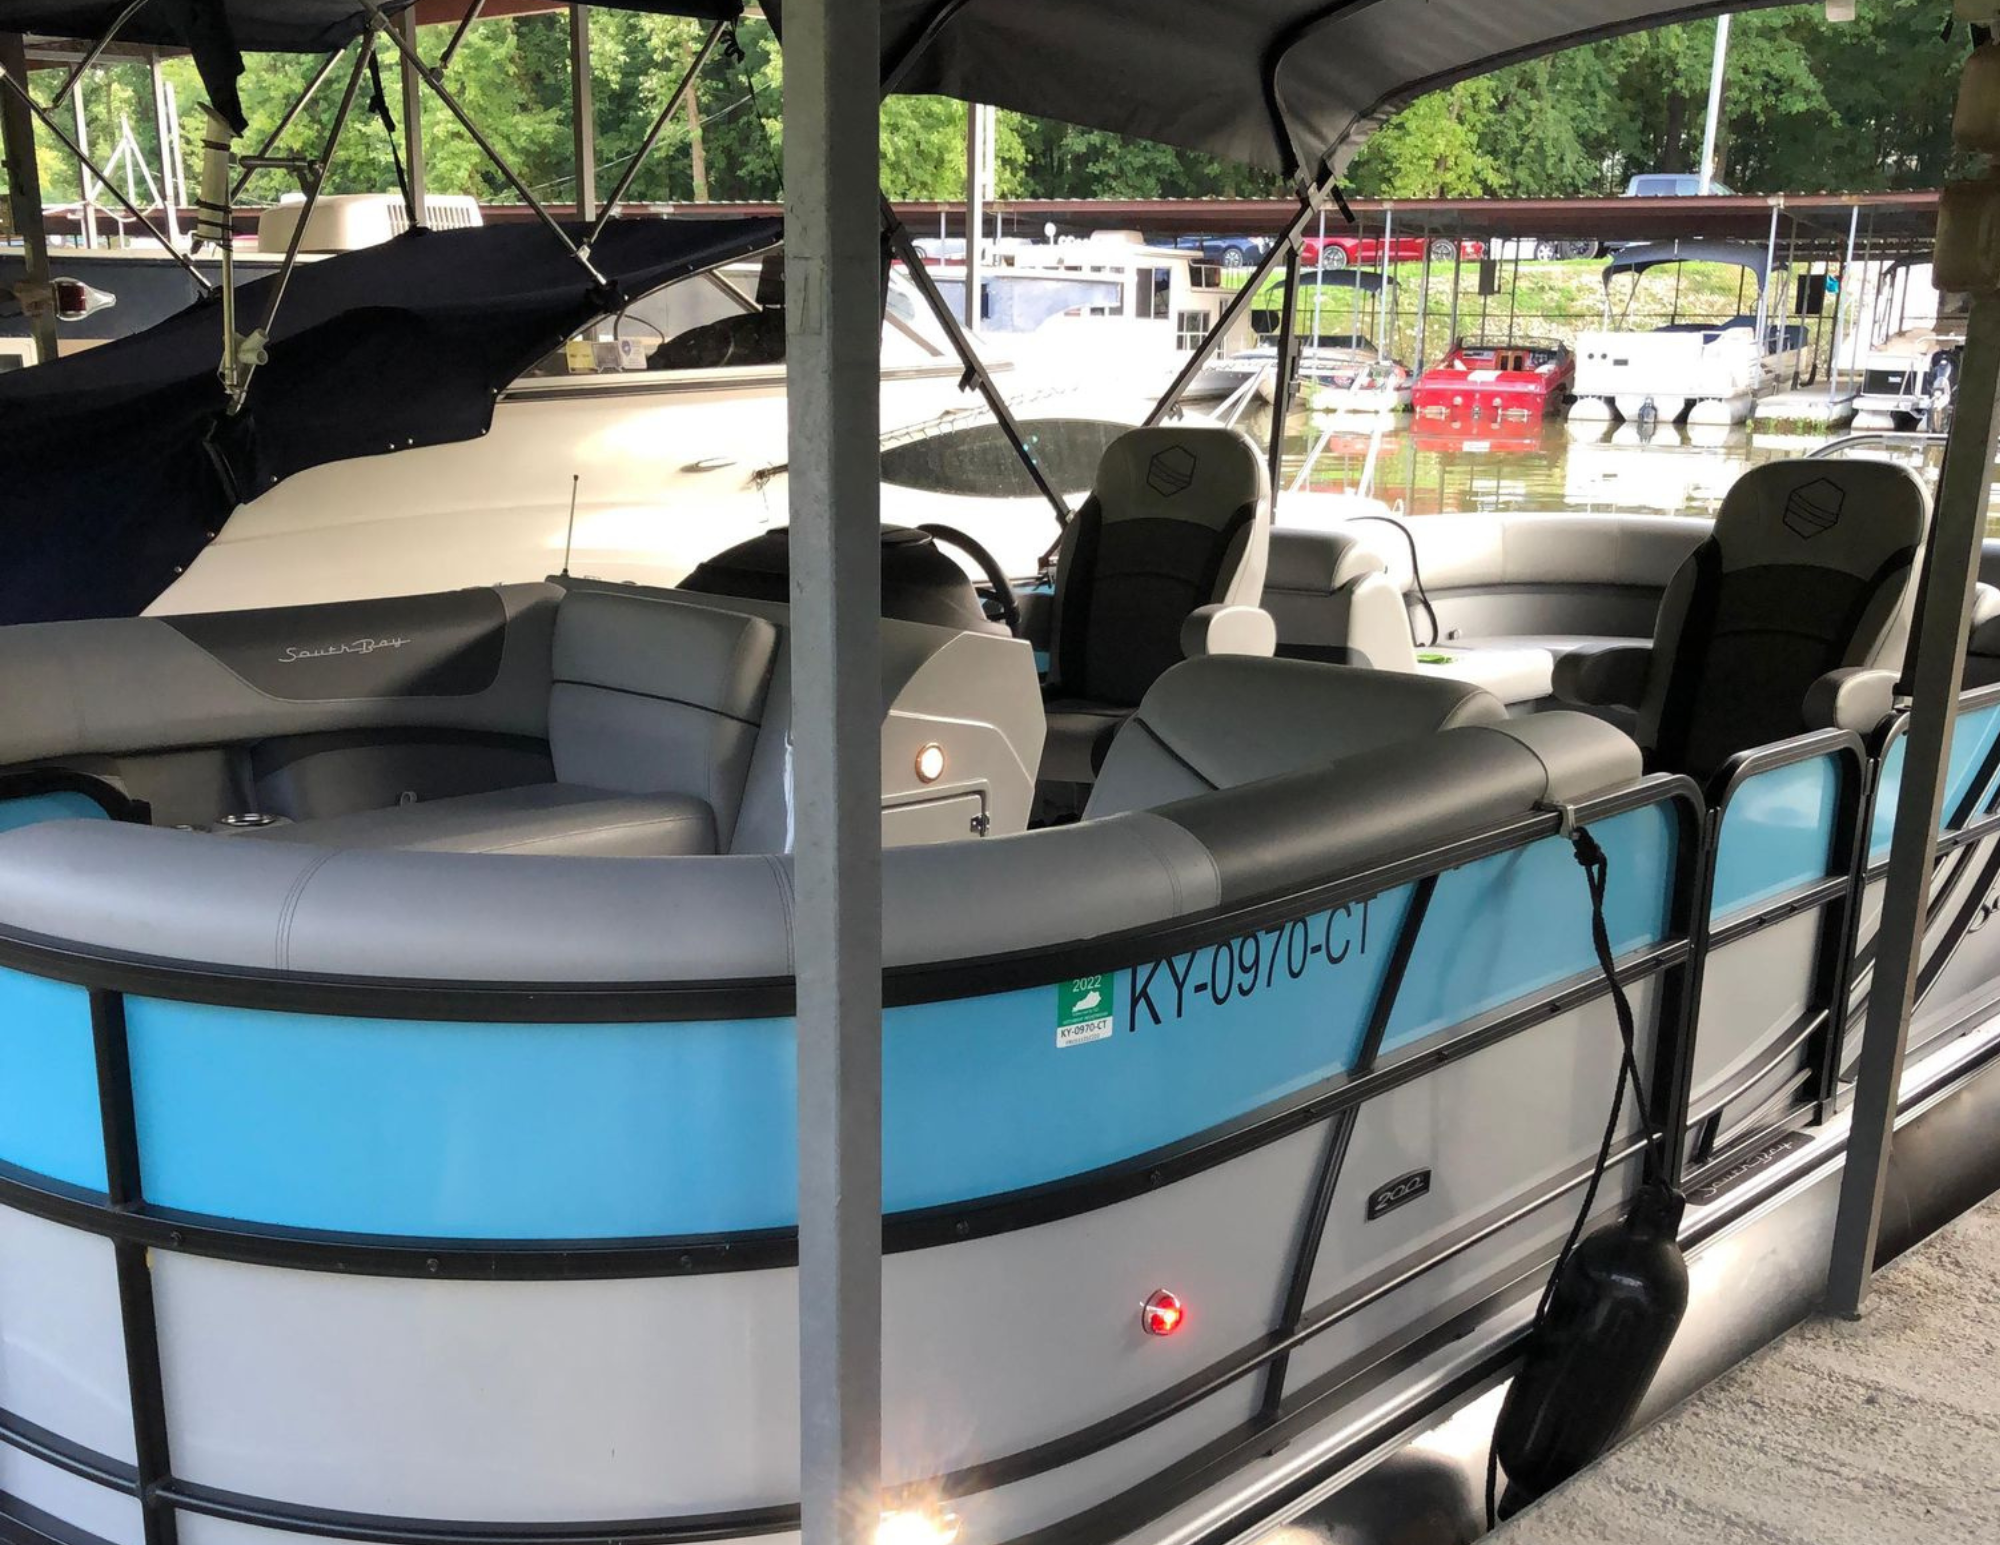 2022 South Bay 24' Tritoon S224RS 3.0